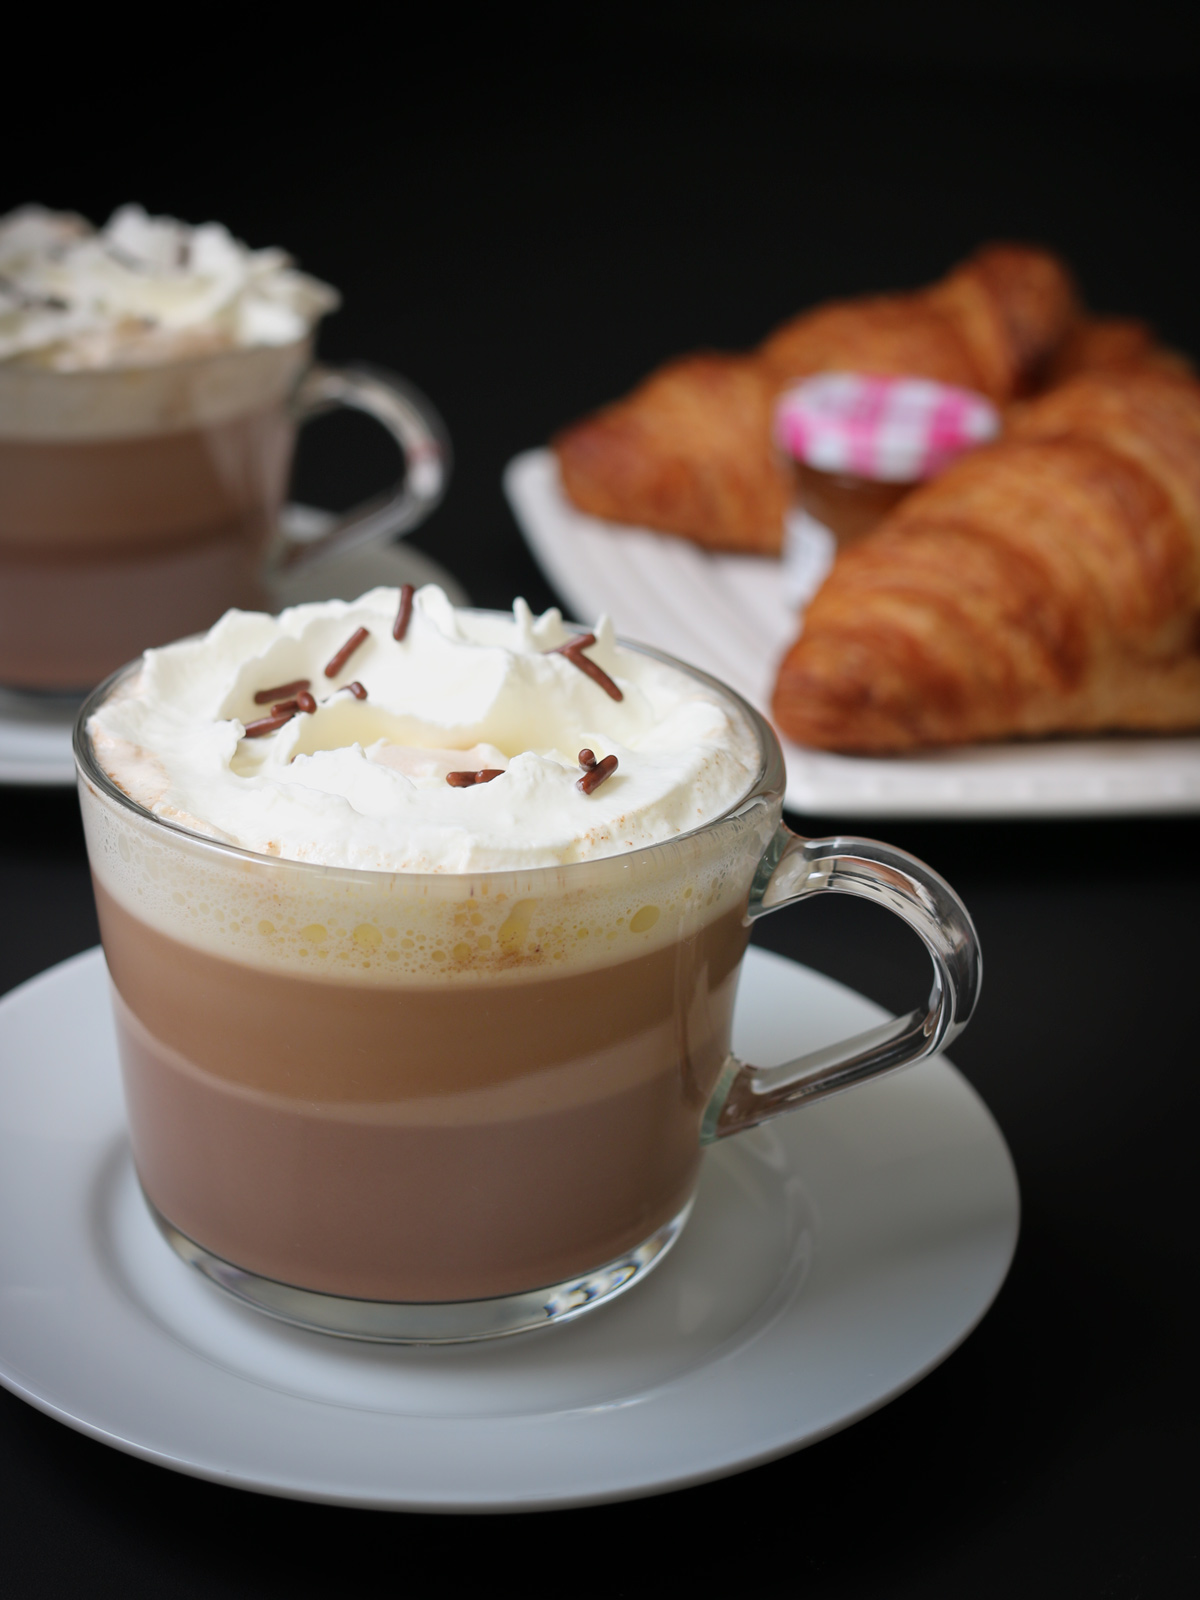 clear mugs of hot chocolate with toppings on white saucers, a plate of croissant in the background.